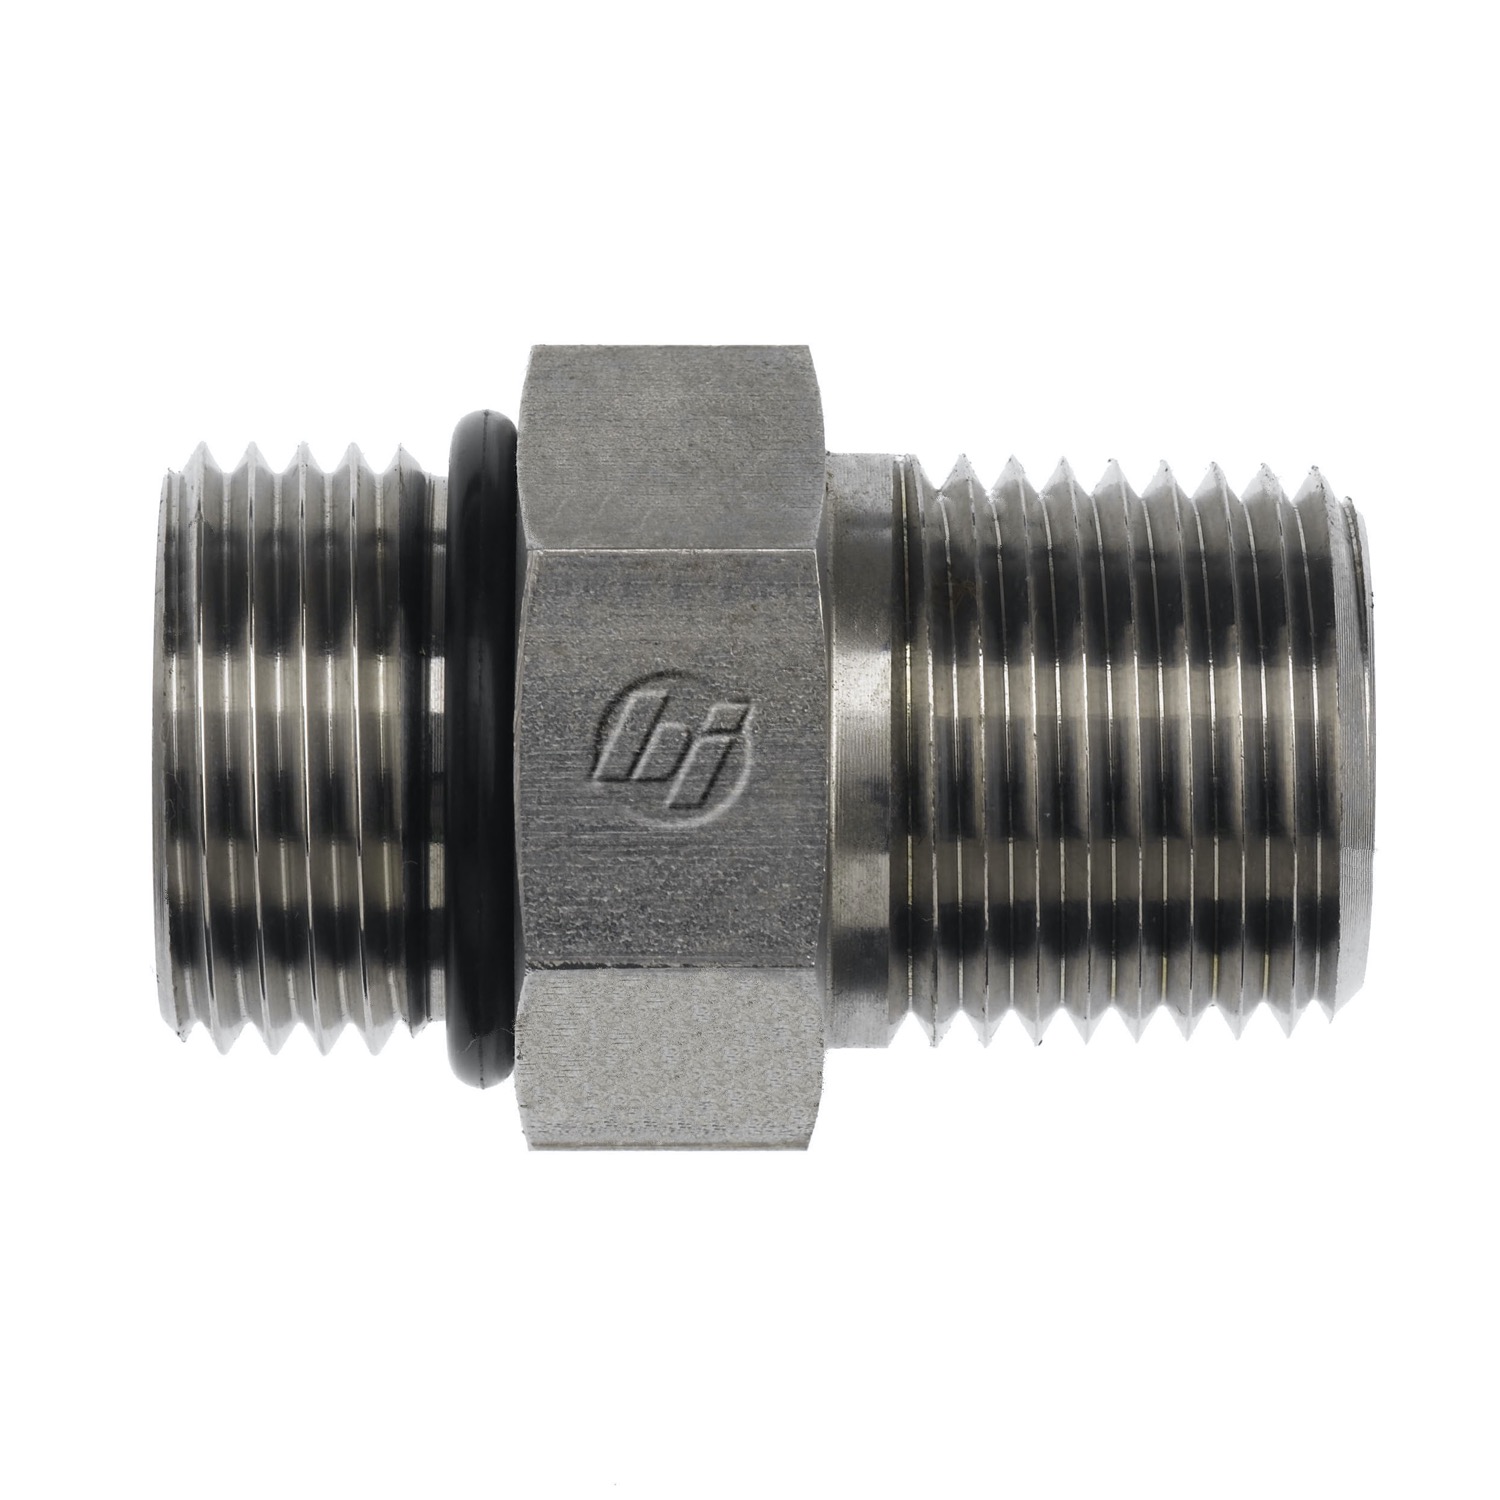 Hydraulic Hose Adapters - Straight Fitting, O-Ring Boss to NPTF, 6401 Series 6401-05-04-O